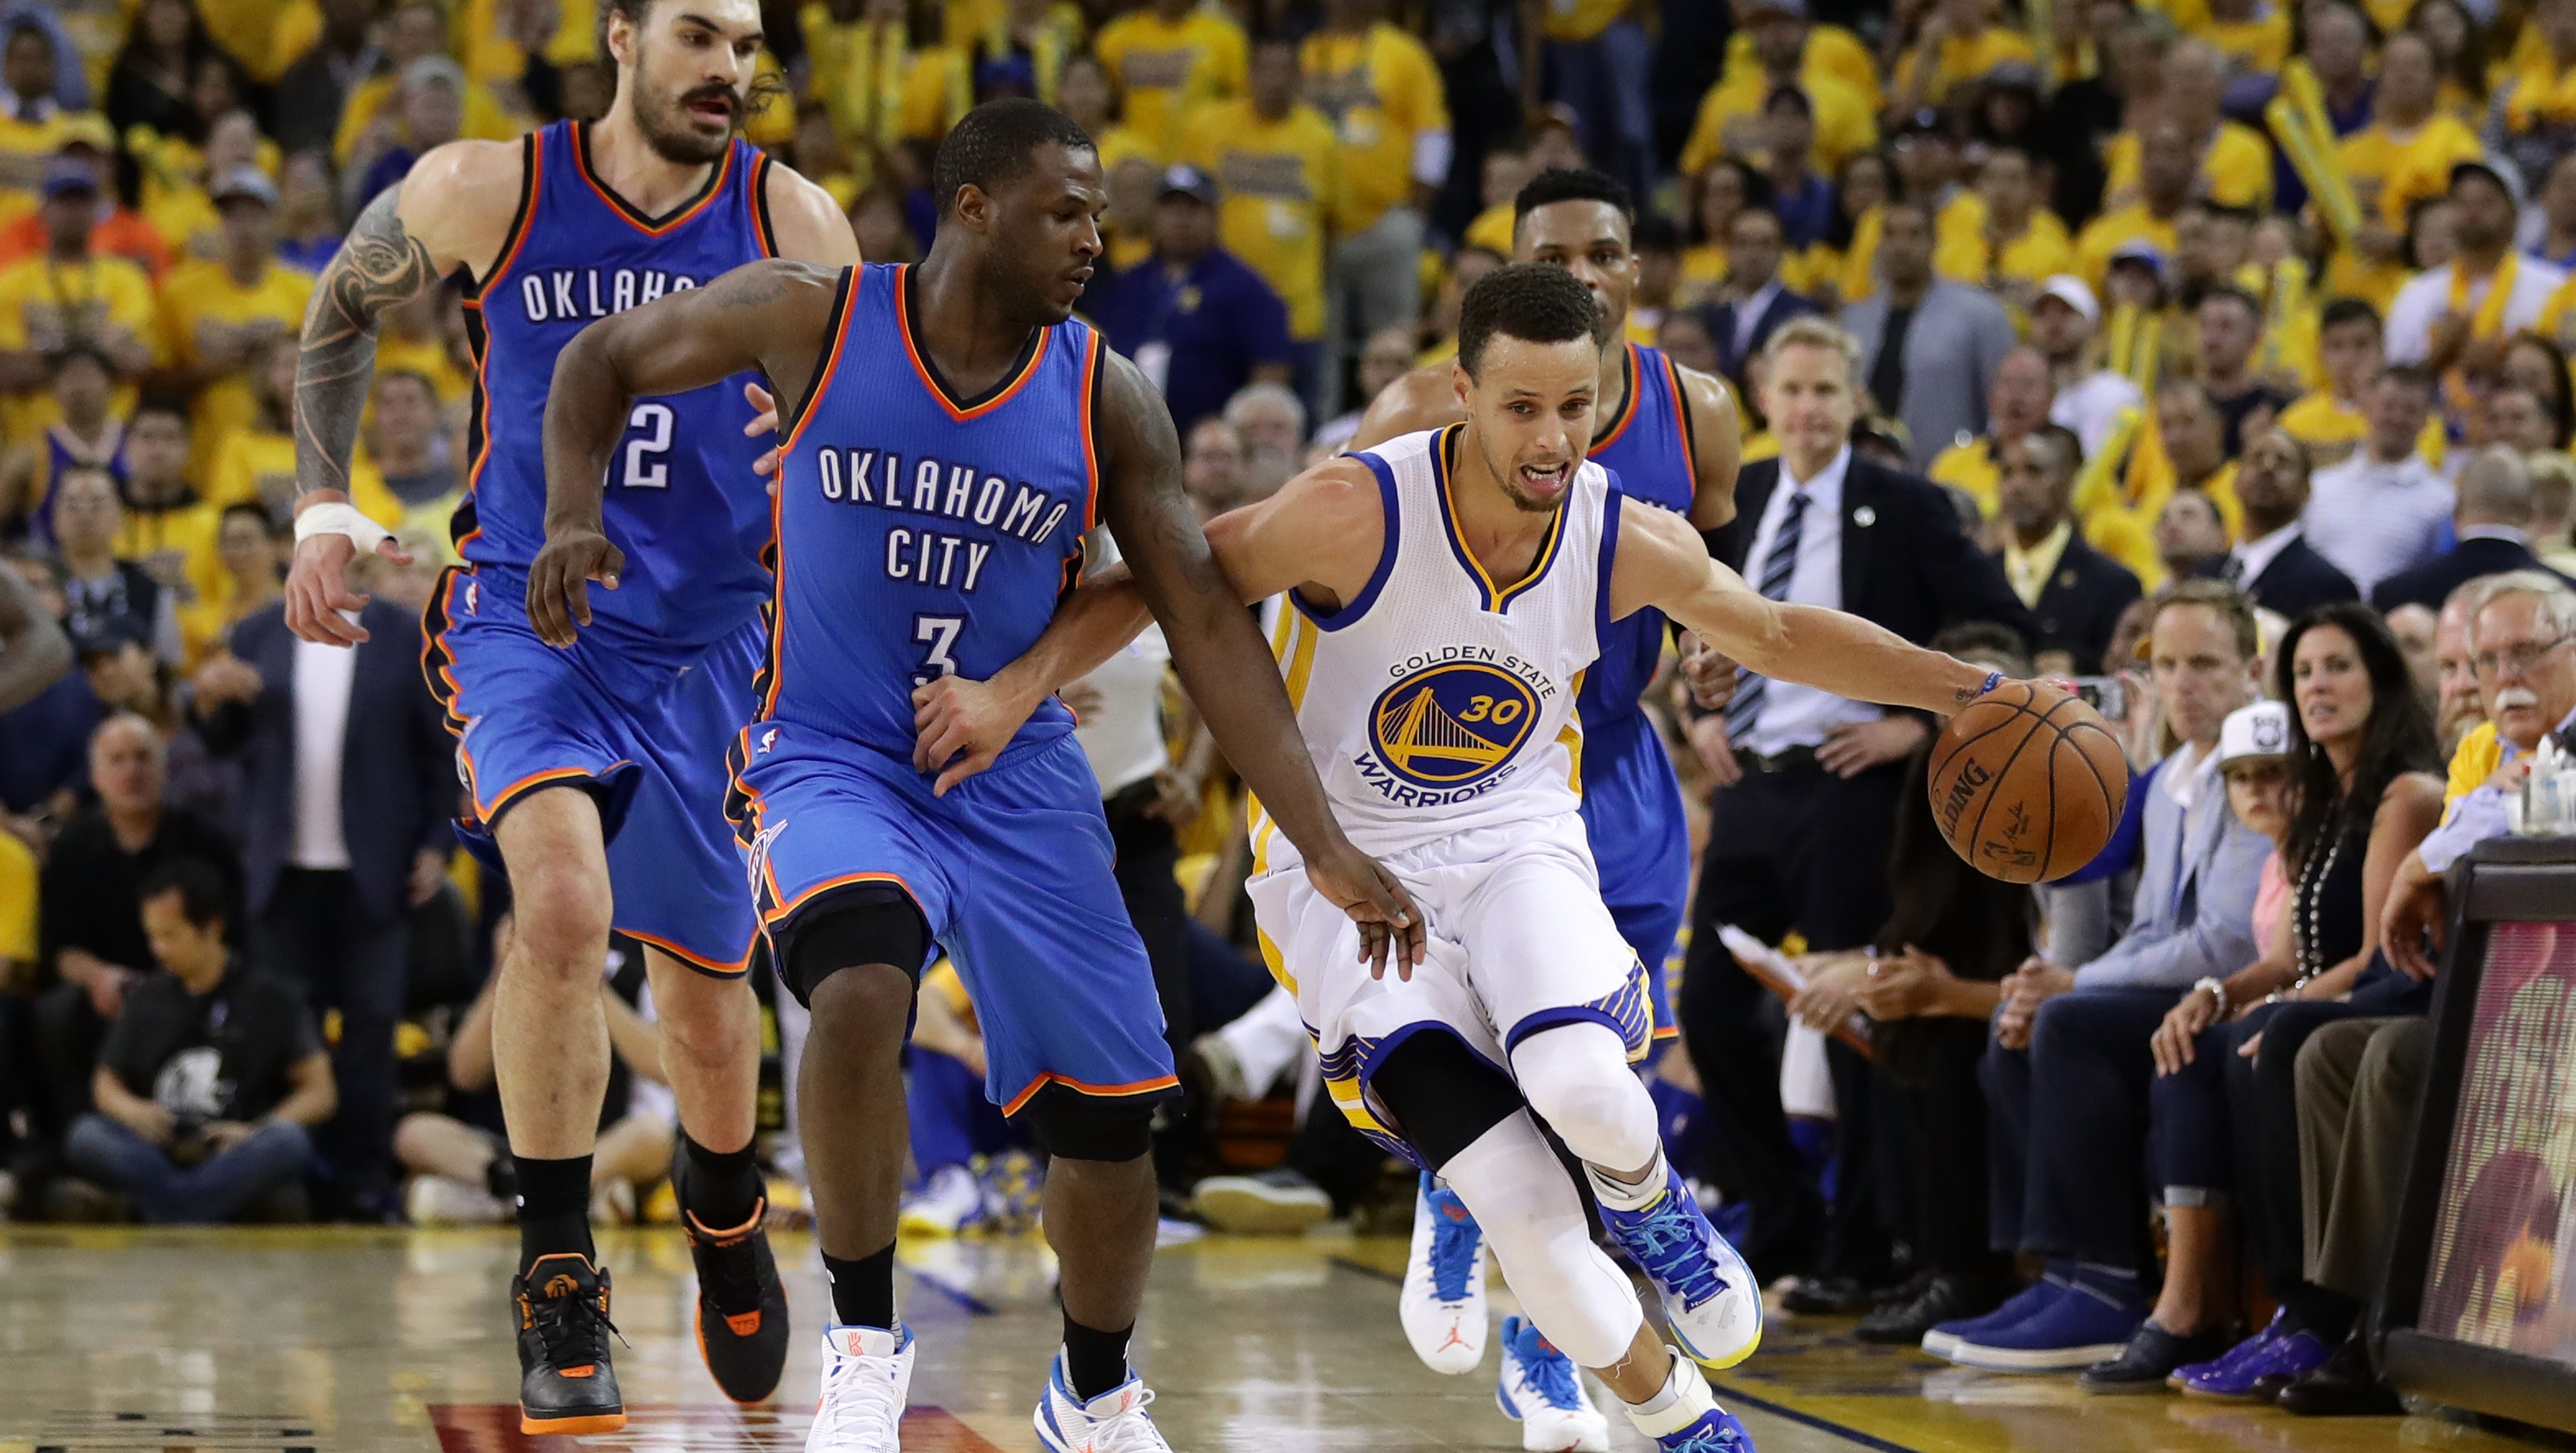 Warriors vs Thunder Live Stream How to Watch Game 6 Free